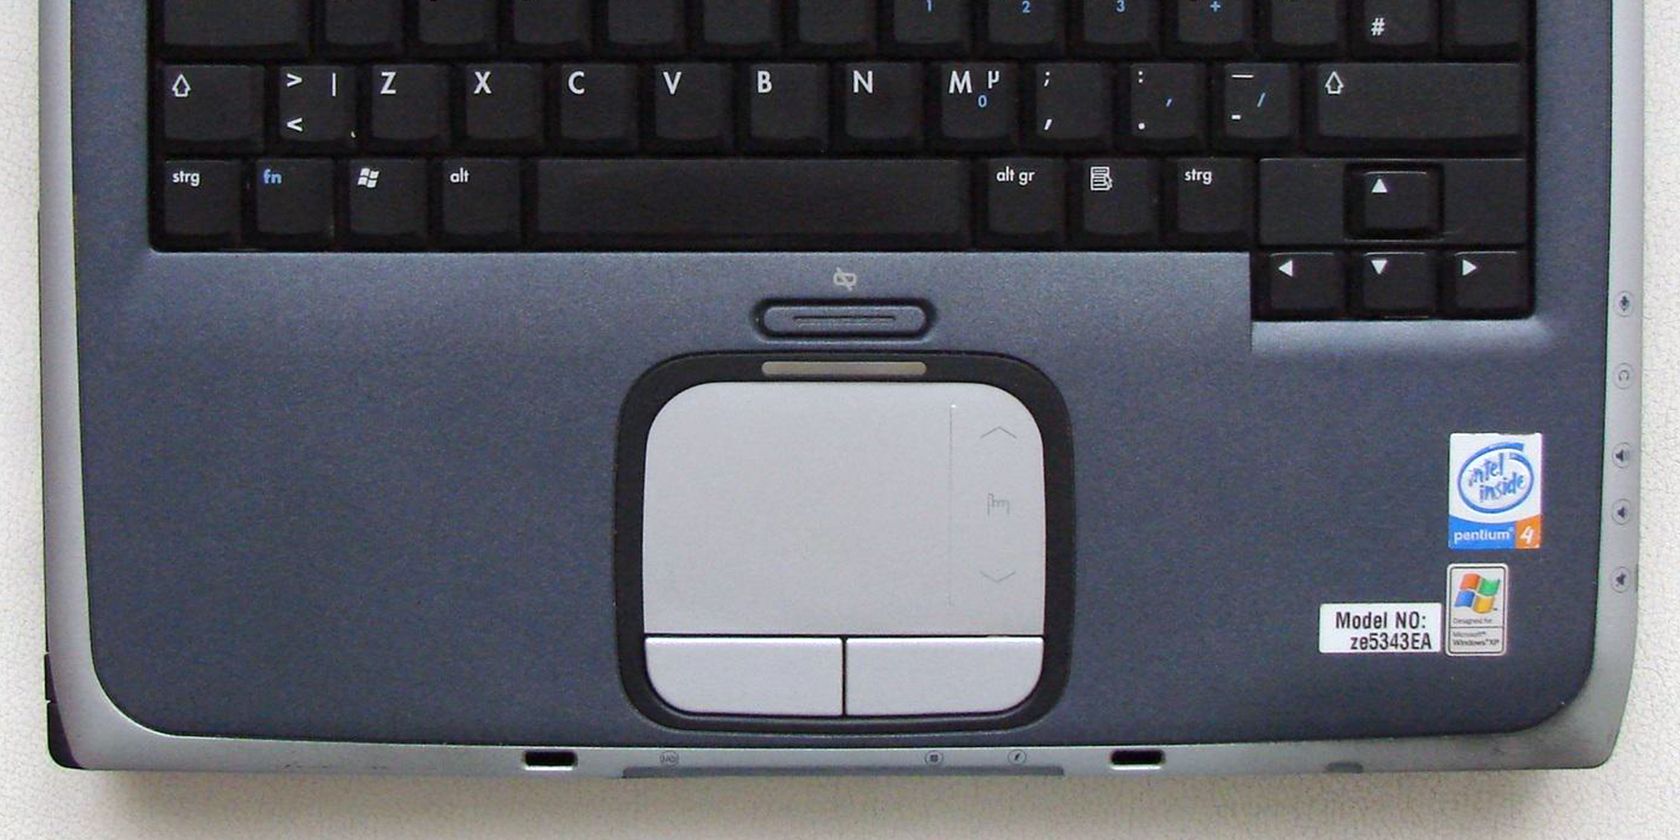 A Laptop Powered by Intel Pentium 4 With Windows XP